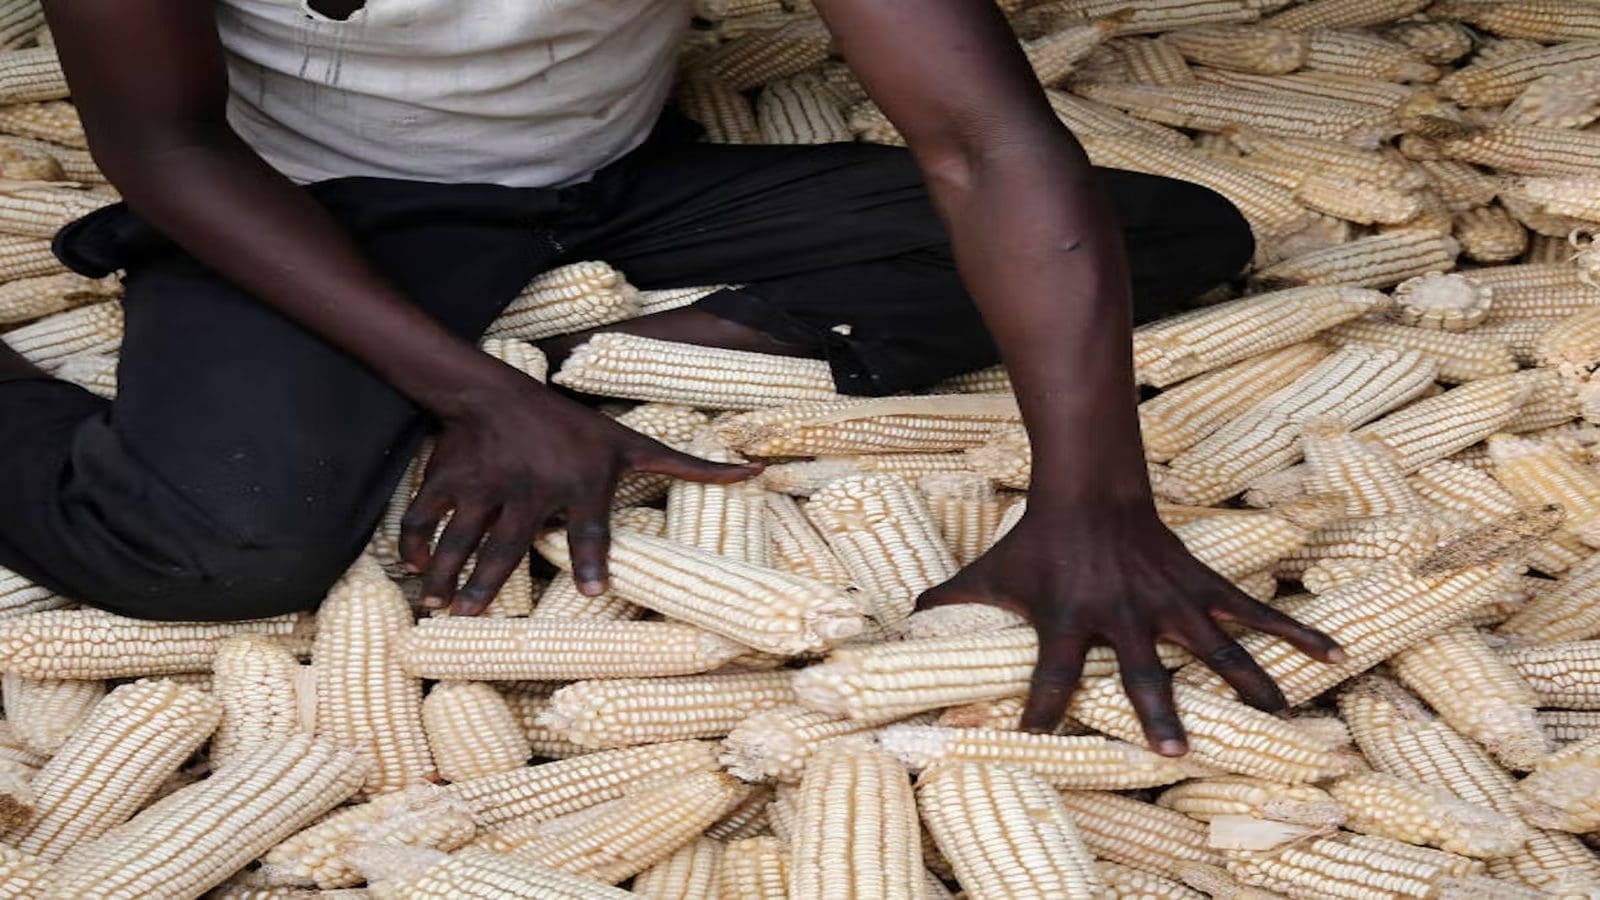 Maize consumption in sub-Saharan Africa to reach historic highs amid declining supply, USDA forecasts